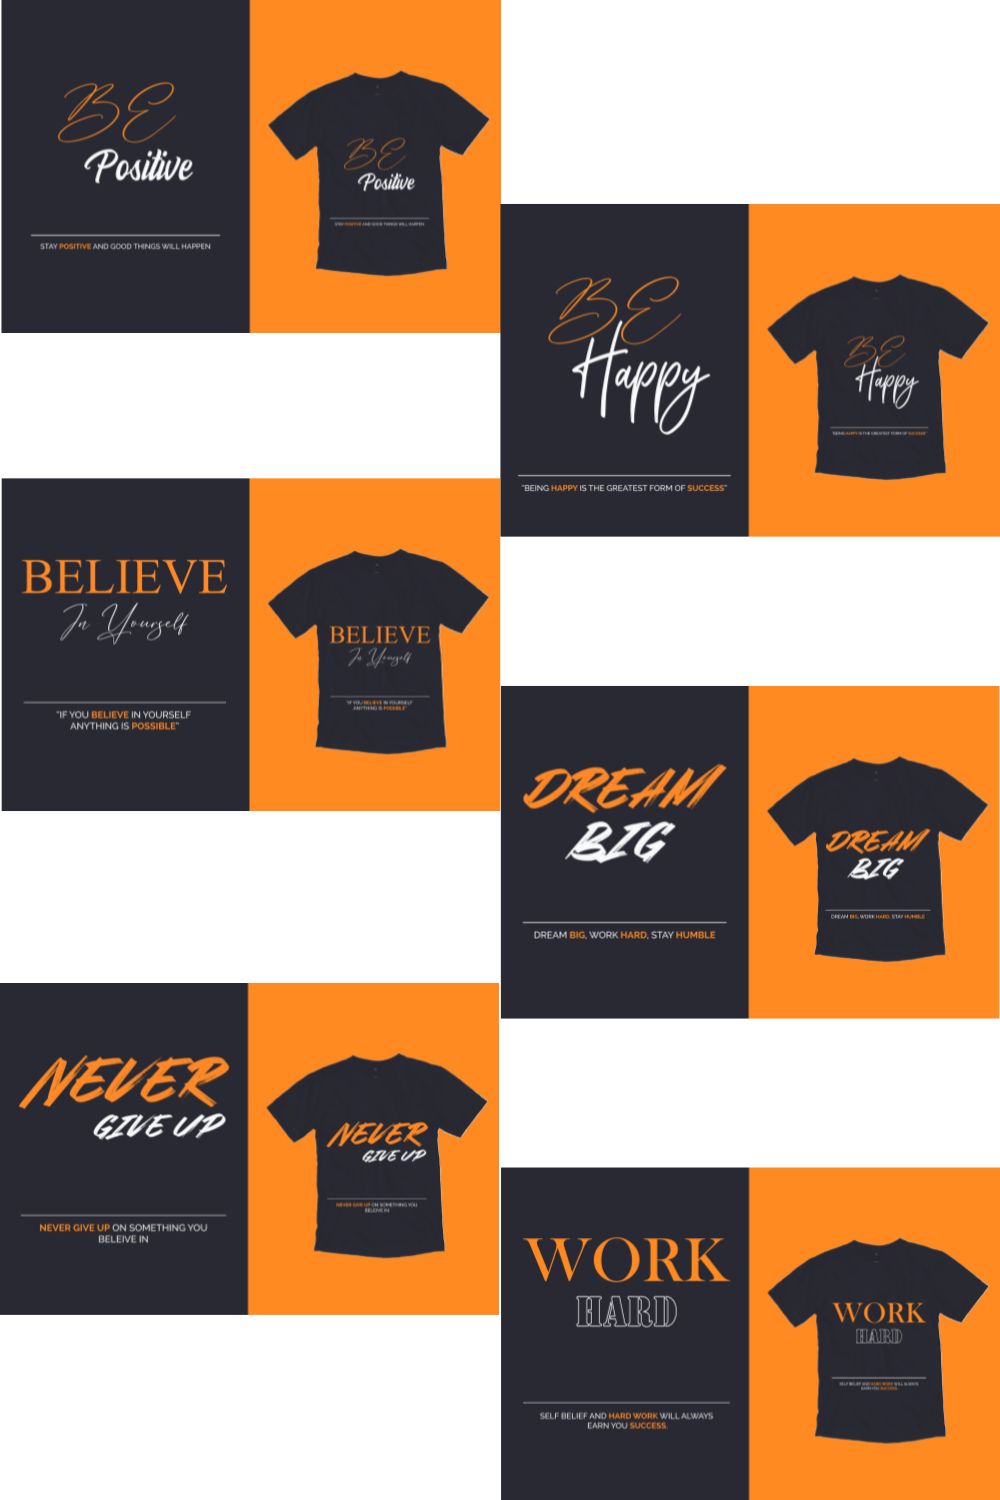 Motivational Quotes Typography T-shirt Designs Pinterest image.